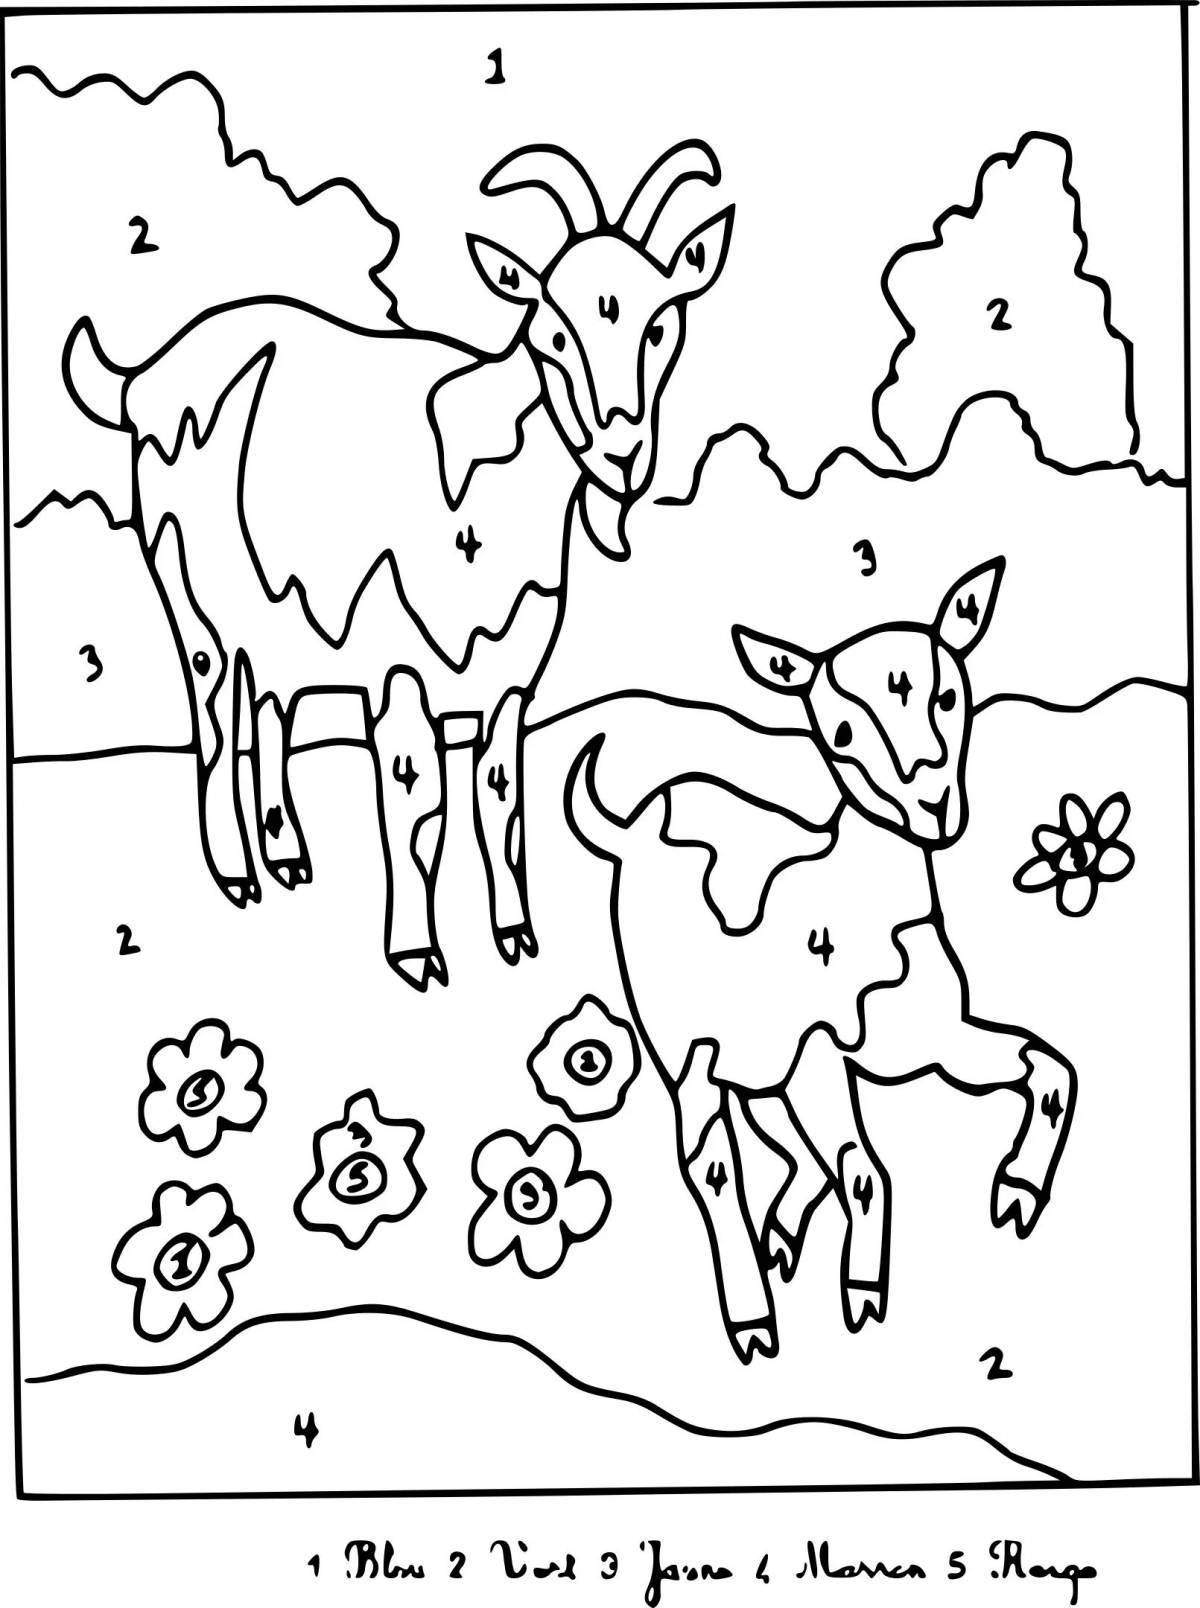 Entertaining coloring wild by numbers